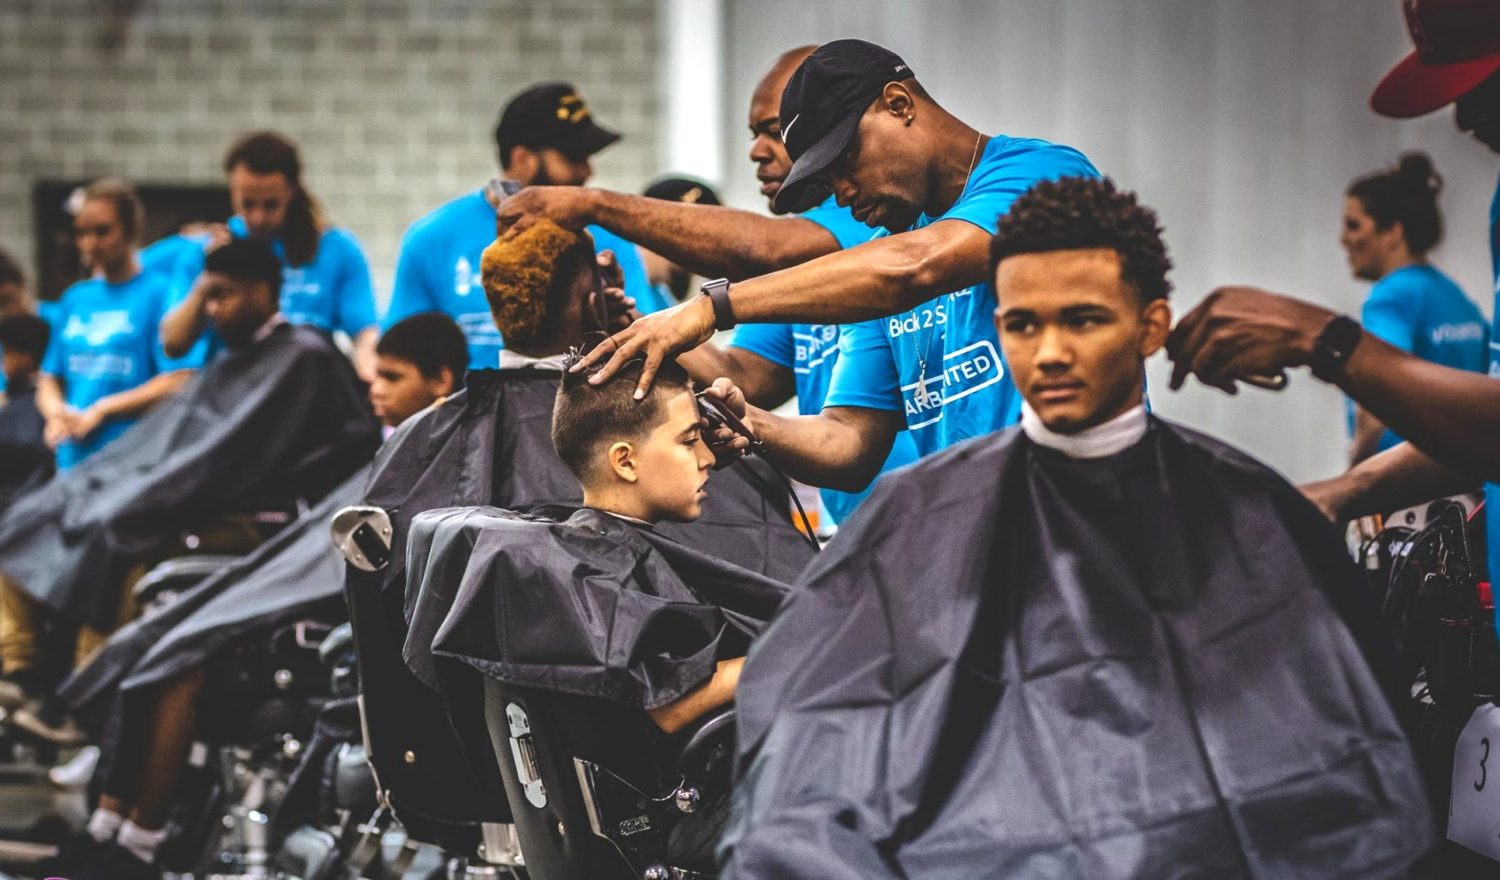 Annual Back to School Haircutz Event Looks to Provide Free Hair Cuts for  600 Kids | Madison365